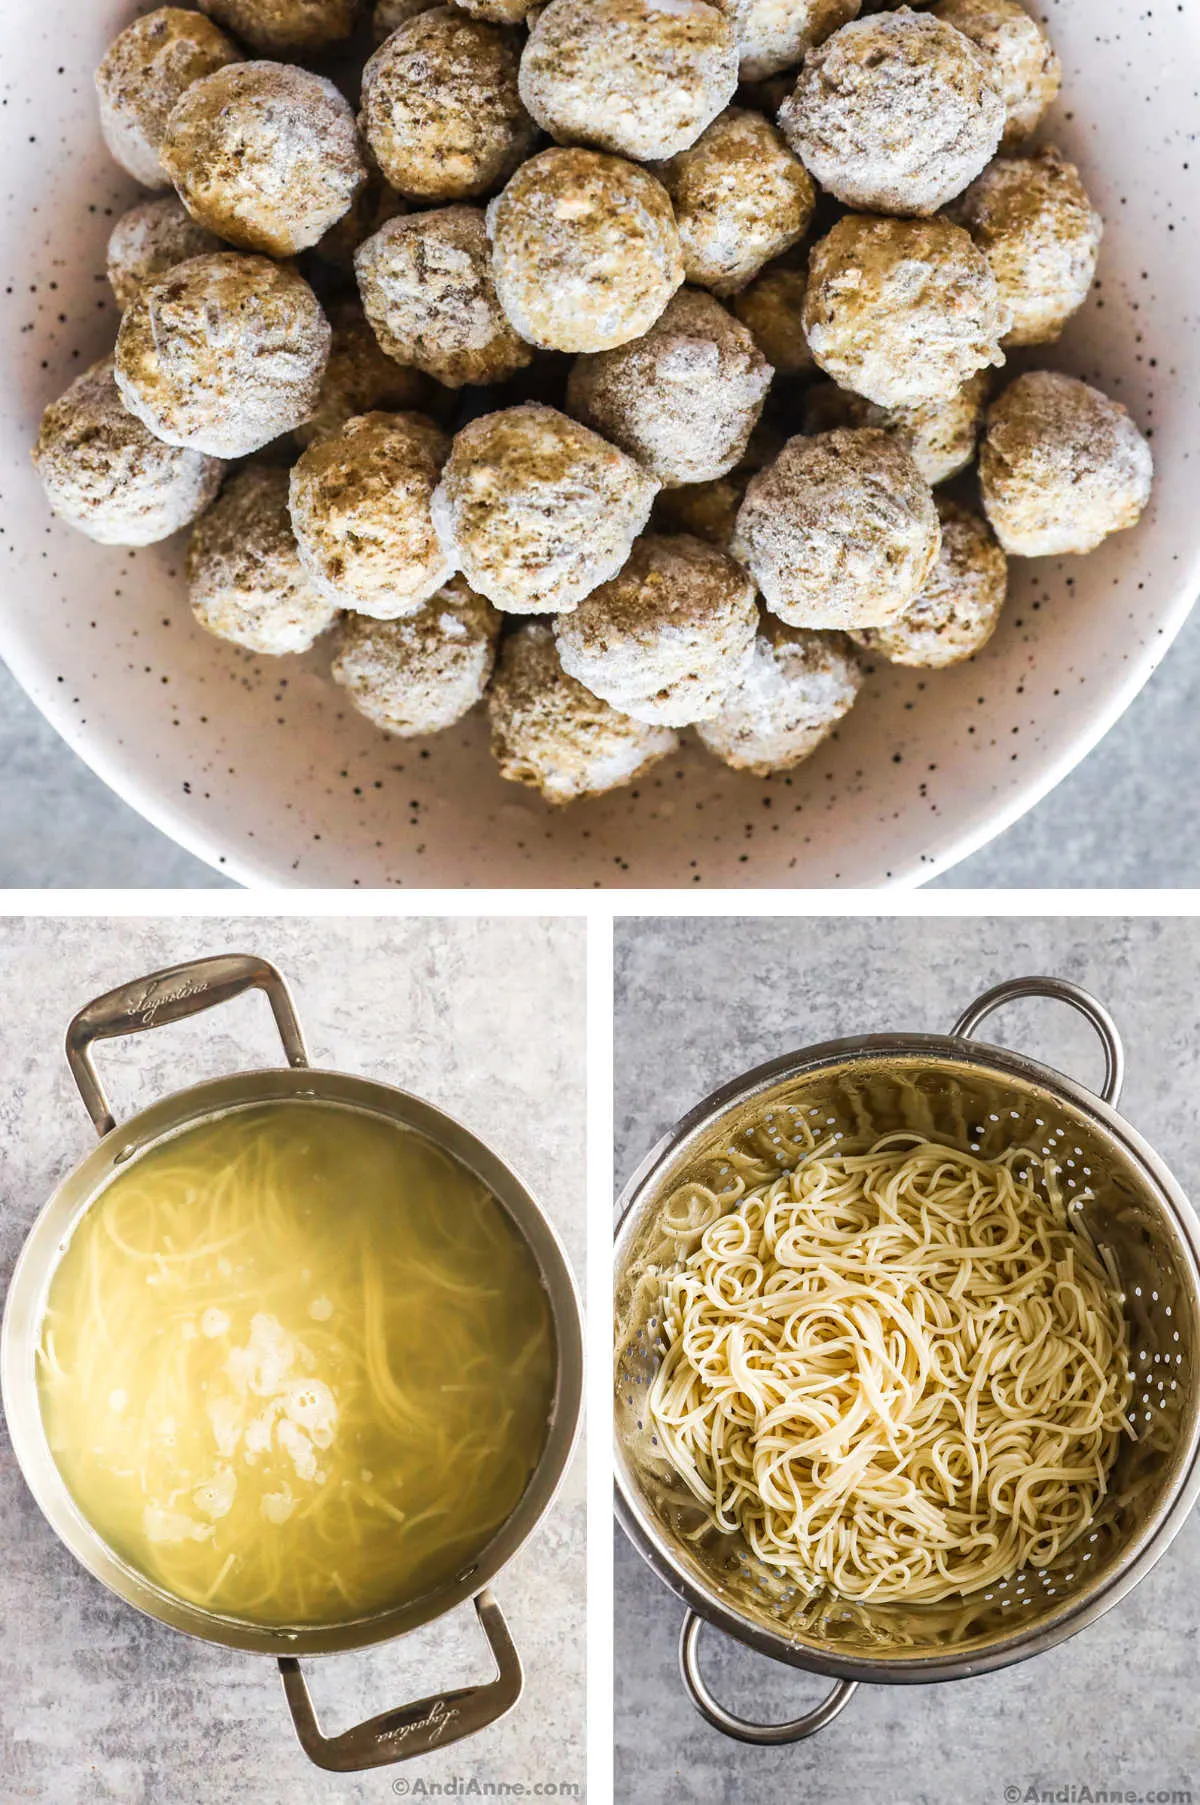 Three overhead images in one: 1. Frozen meatballs in a white bowl. 2. Cooked spaghetti in a silver pot with water. 3. Cooked spaghetti in strainer.